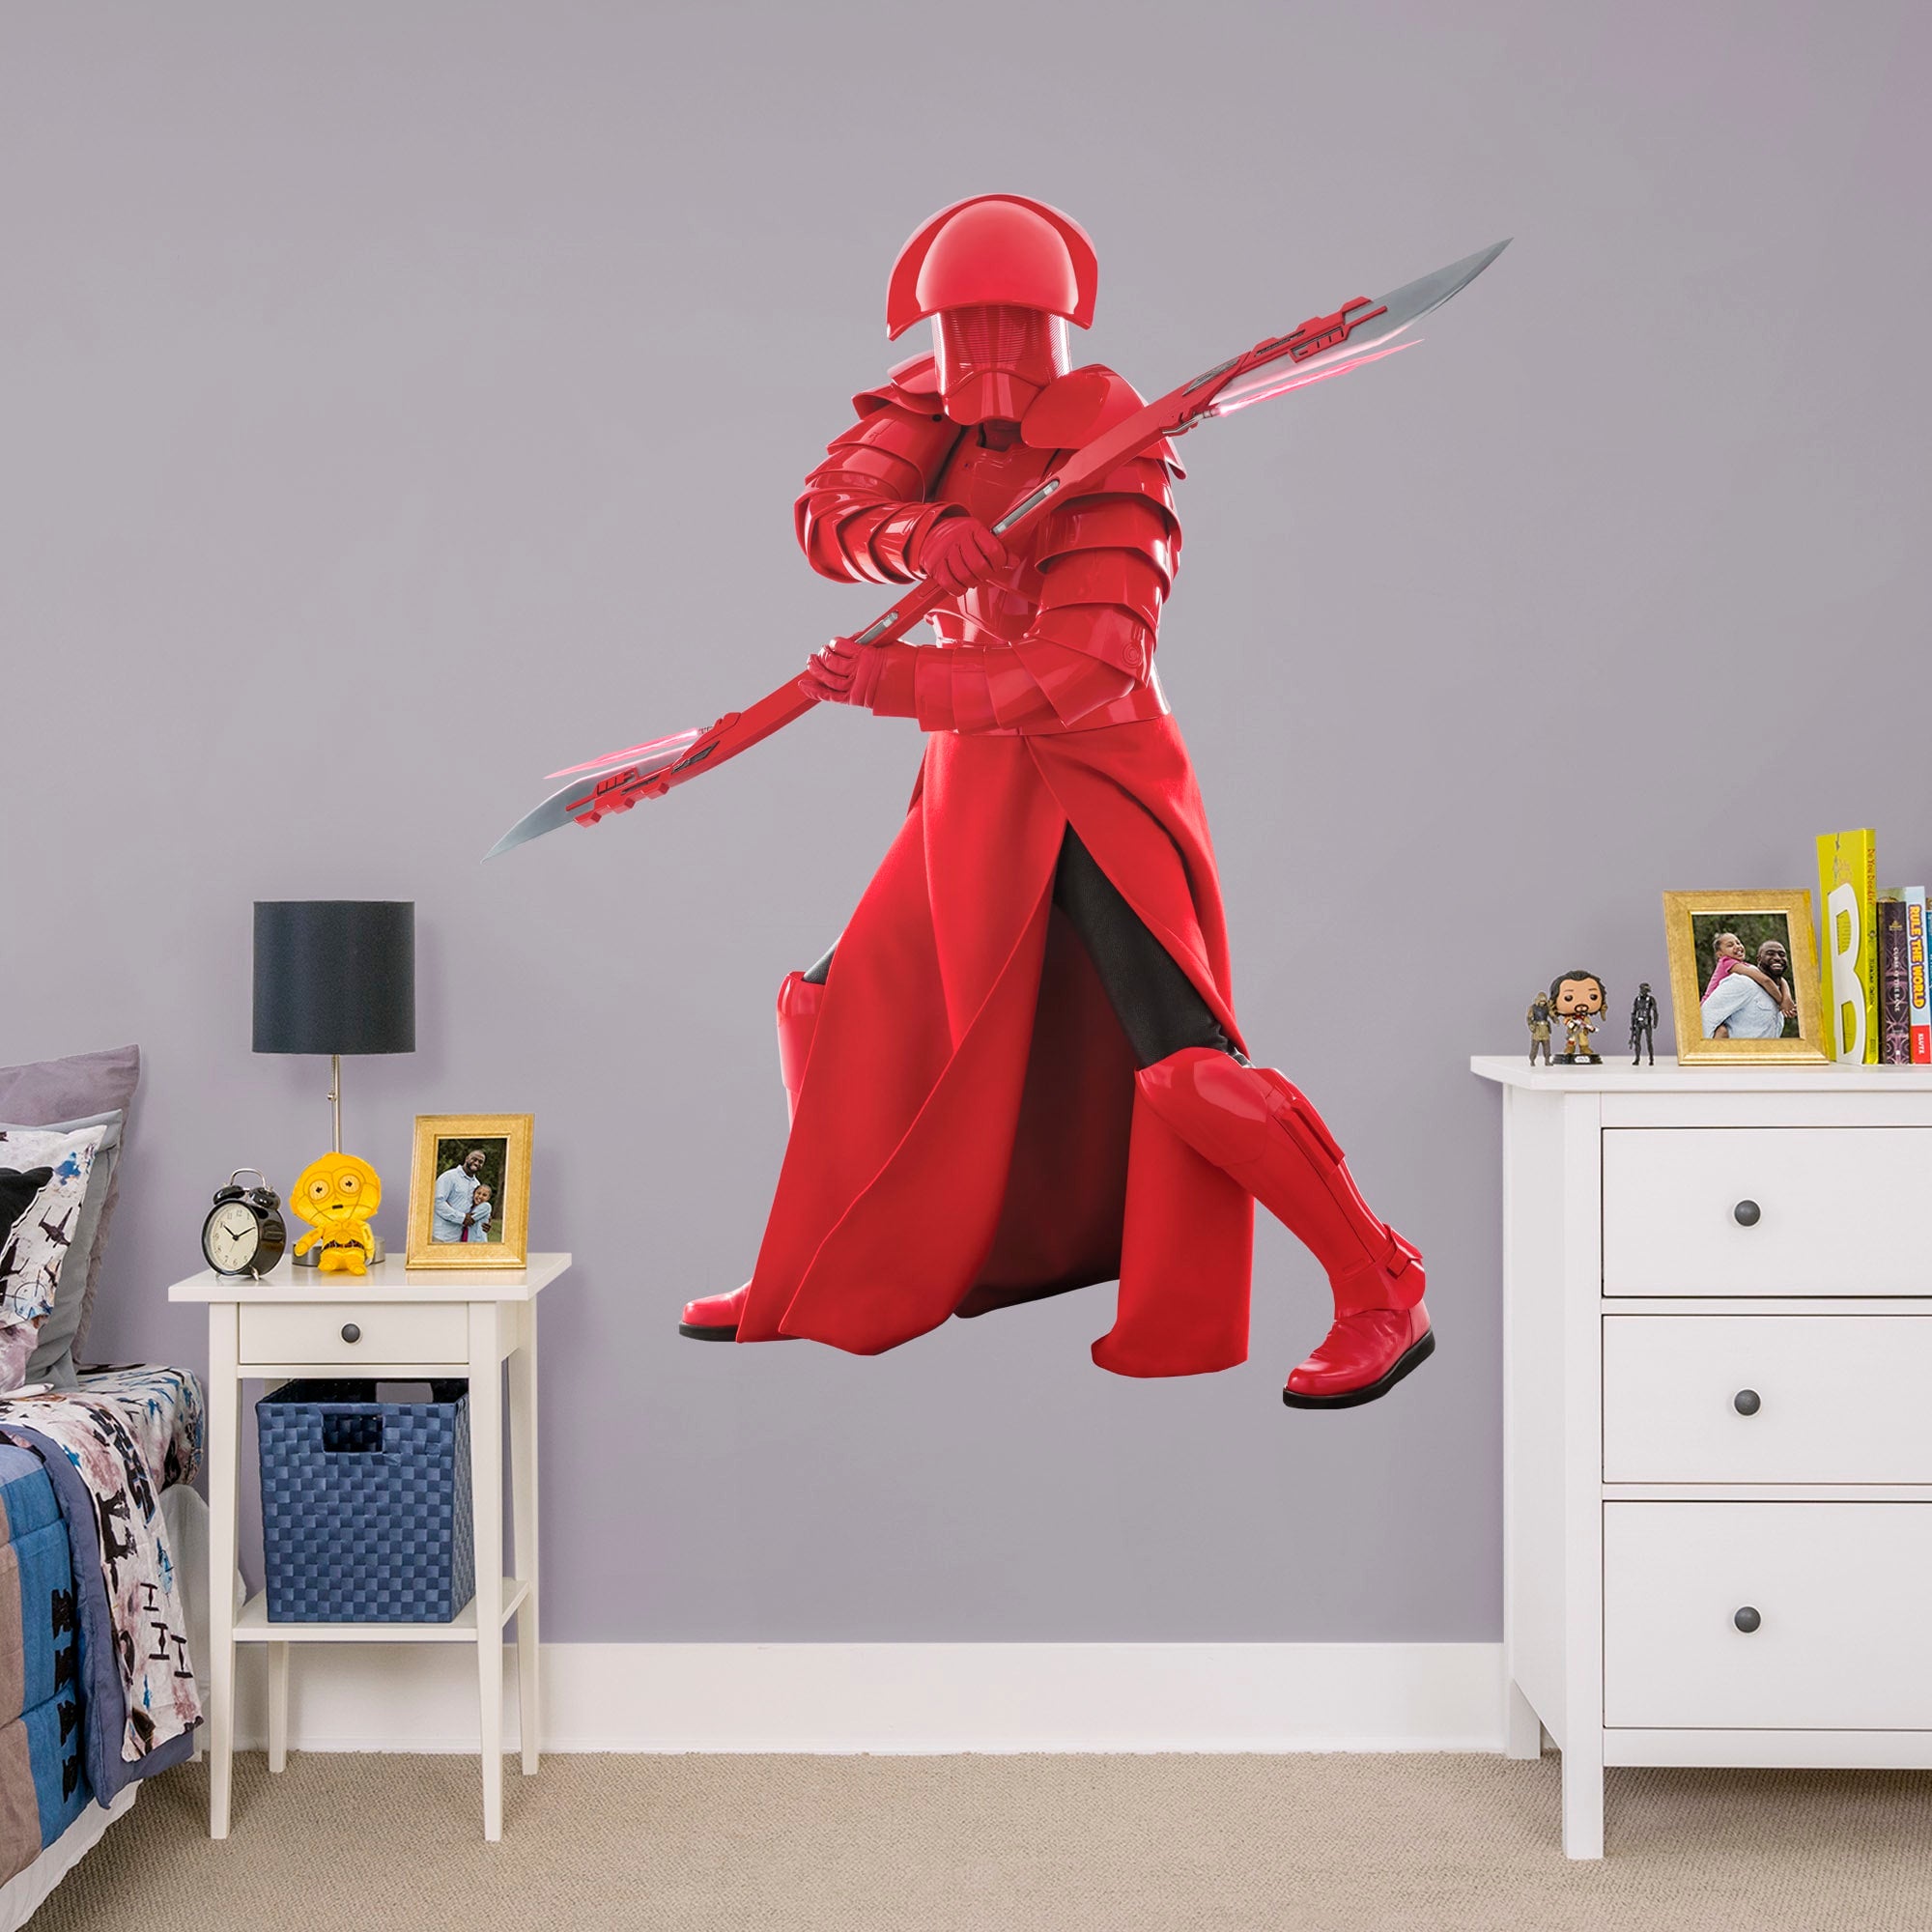 Praetorian Guard - Officially Licensed Removable Wall Decal Life-Size Character + 2 Decals (63"W x 74"H) by Fathead | Vinyl